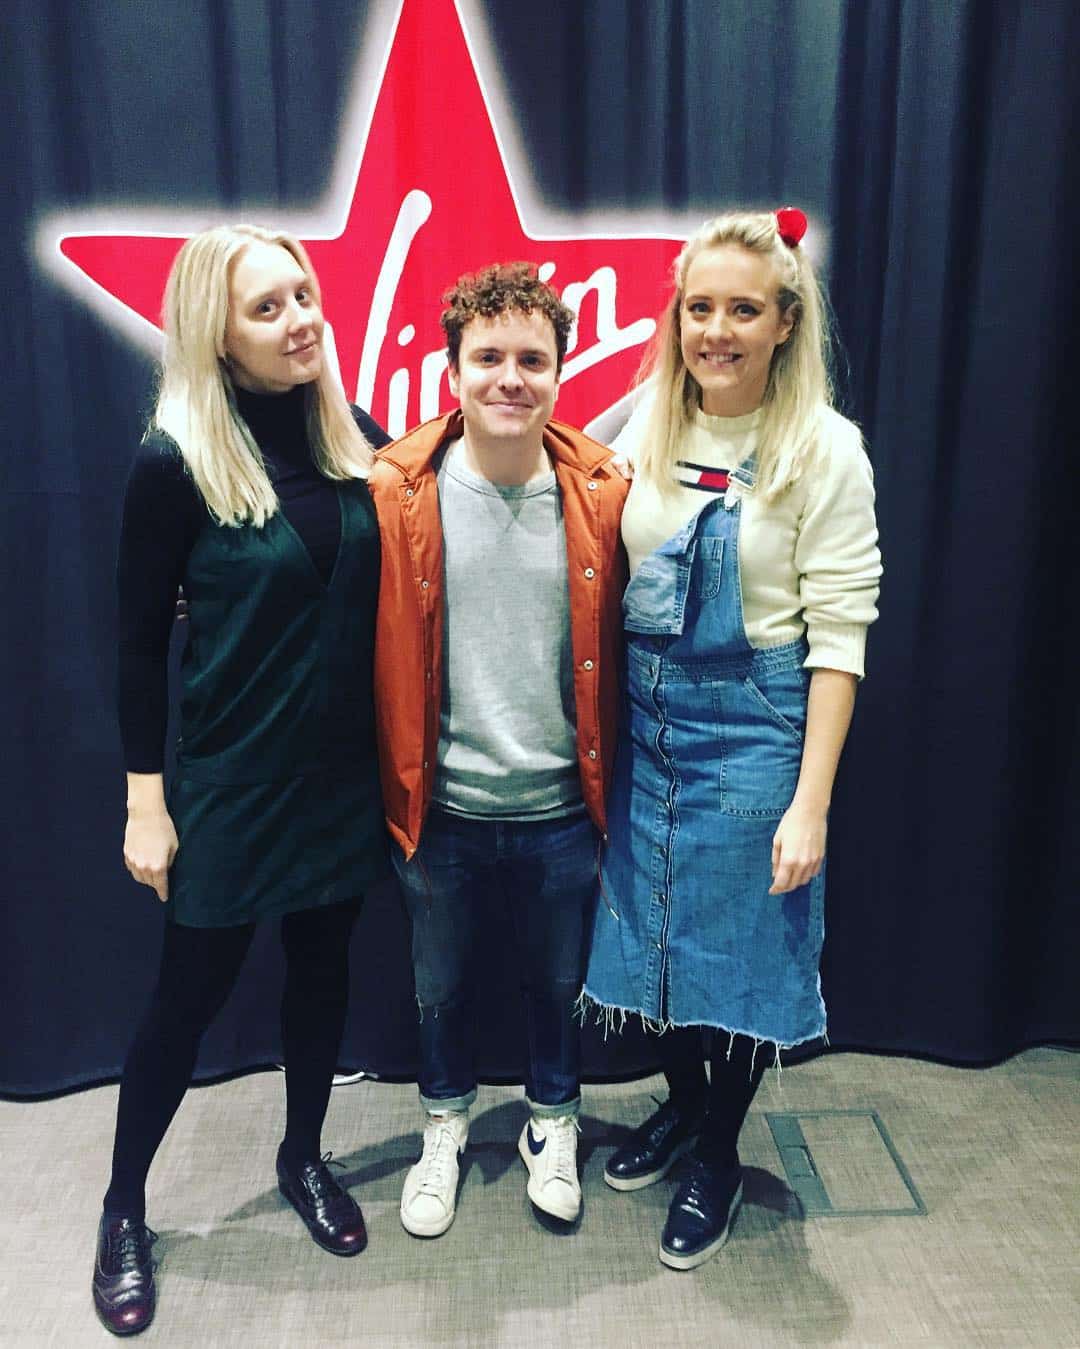 Tune into Virgin radio tonight to @themactwins to hear Josh McGuire talk all things Rosencrantz and Guildernstern Are Dead